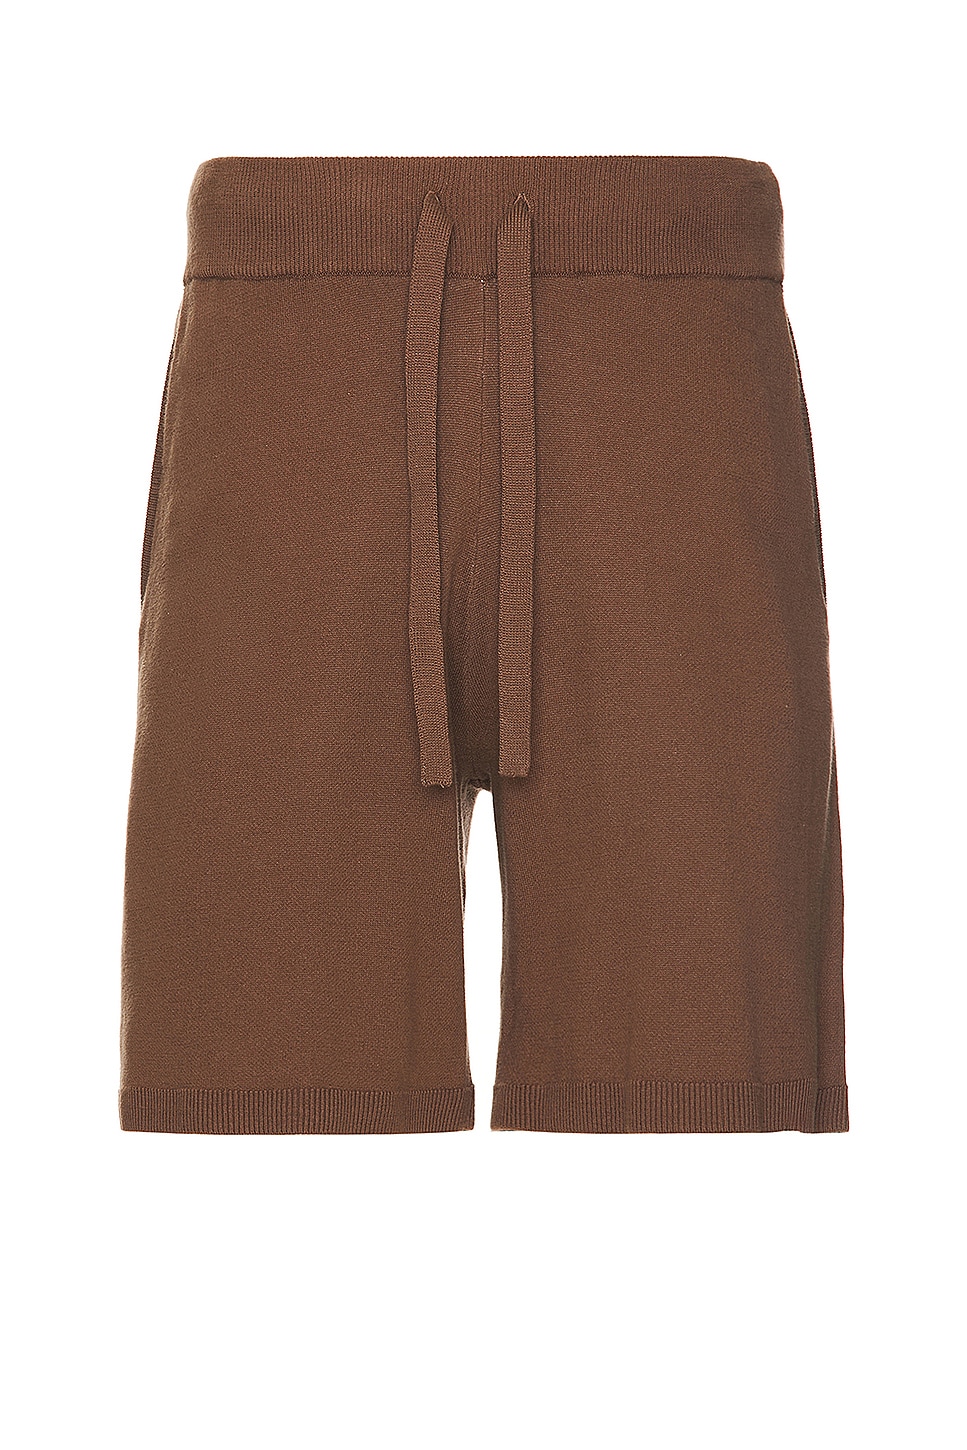 Image 1 of WAO Fully Knitted Short in Brown